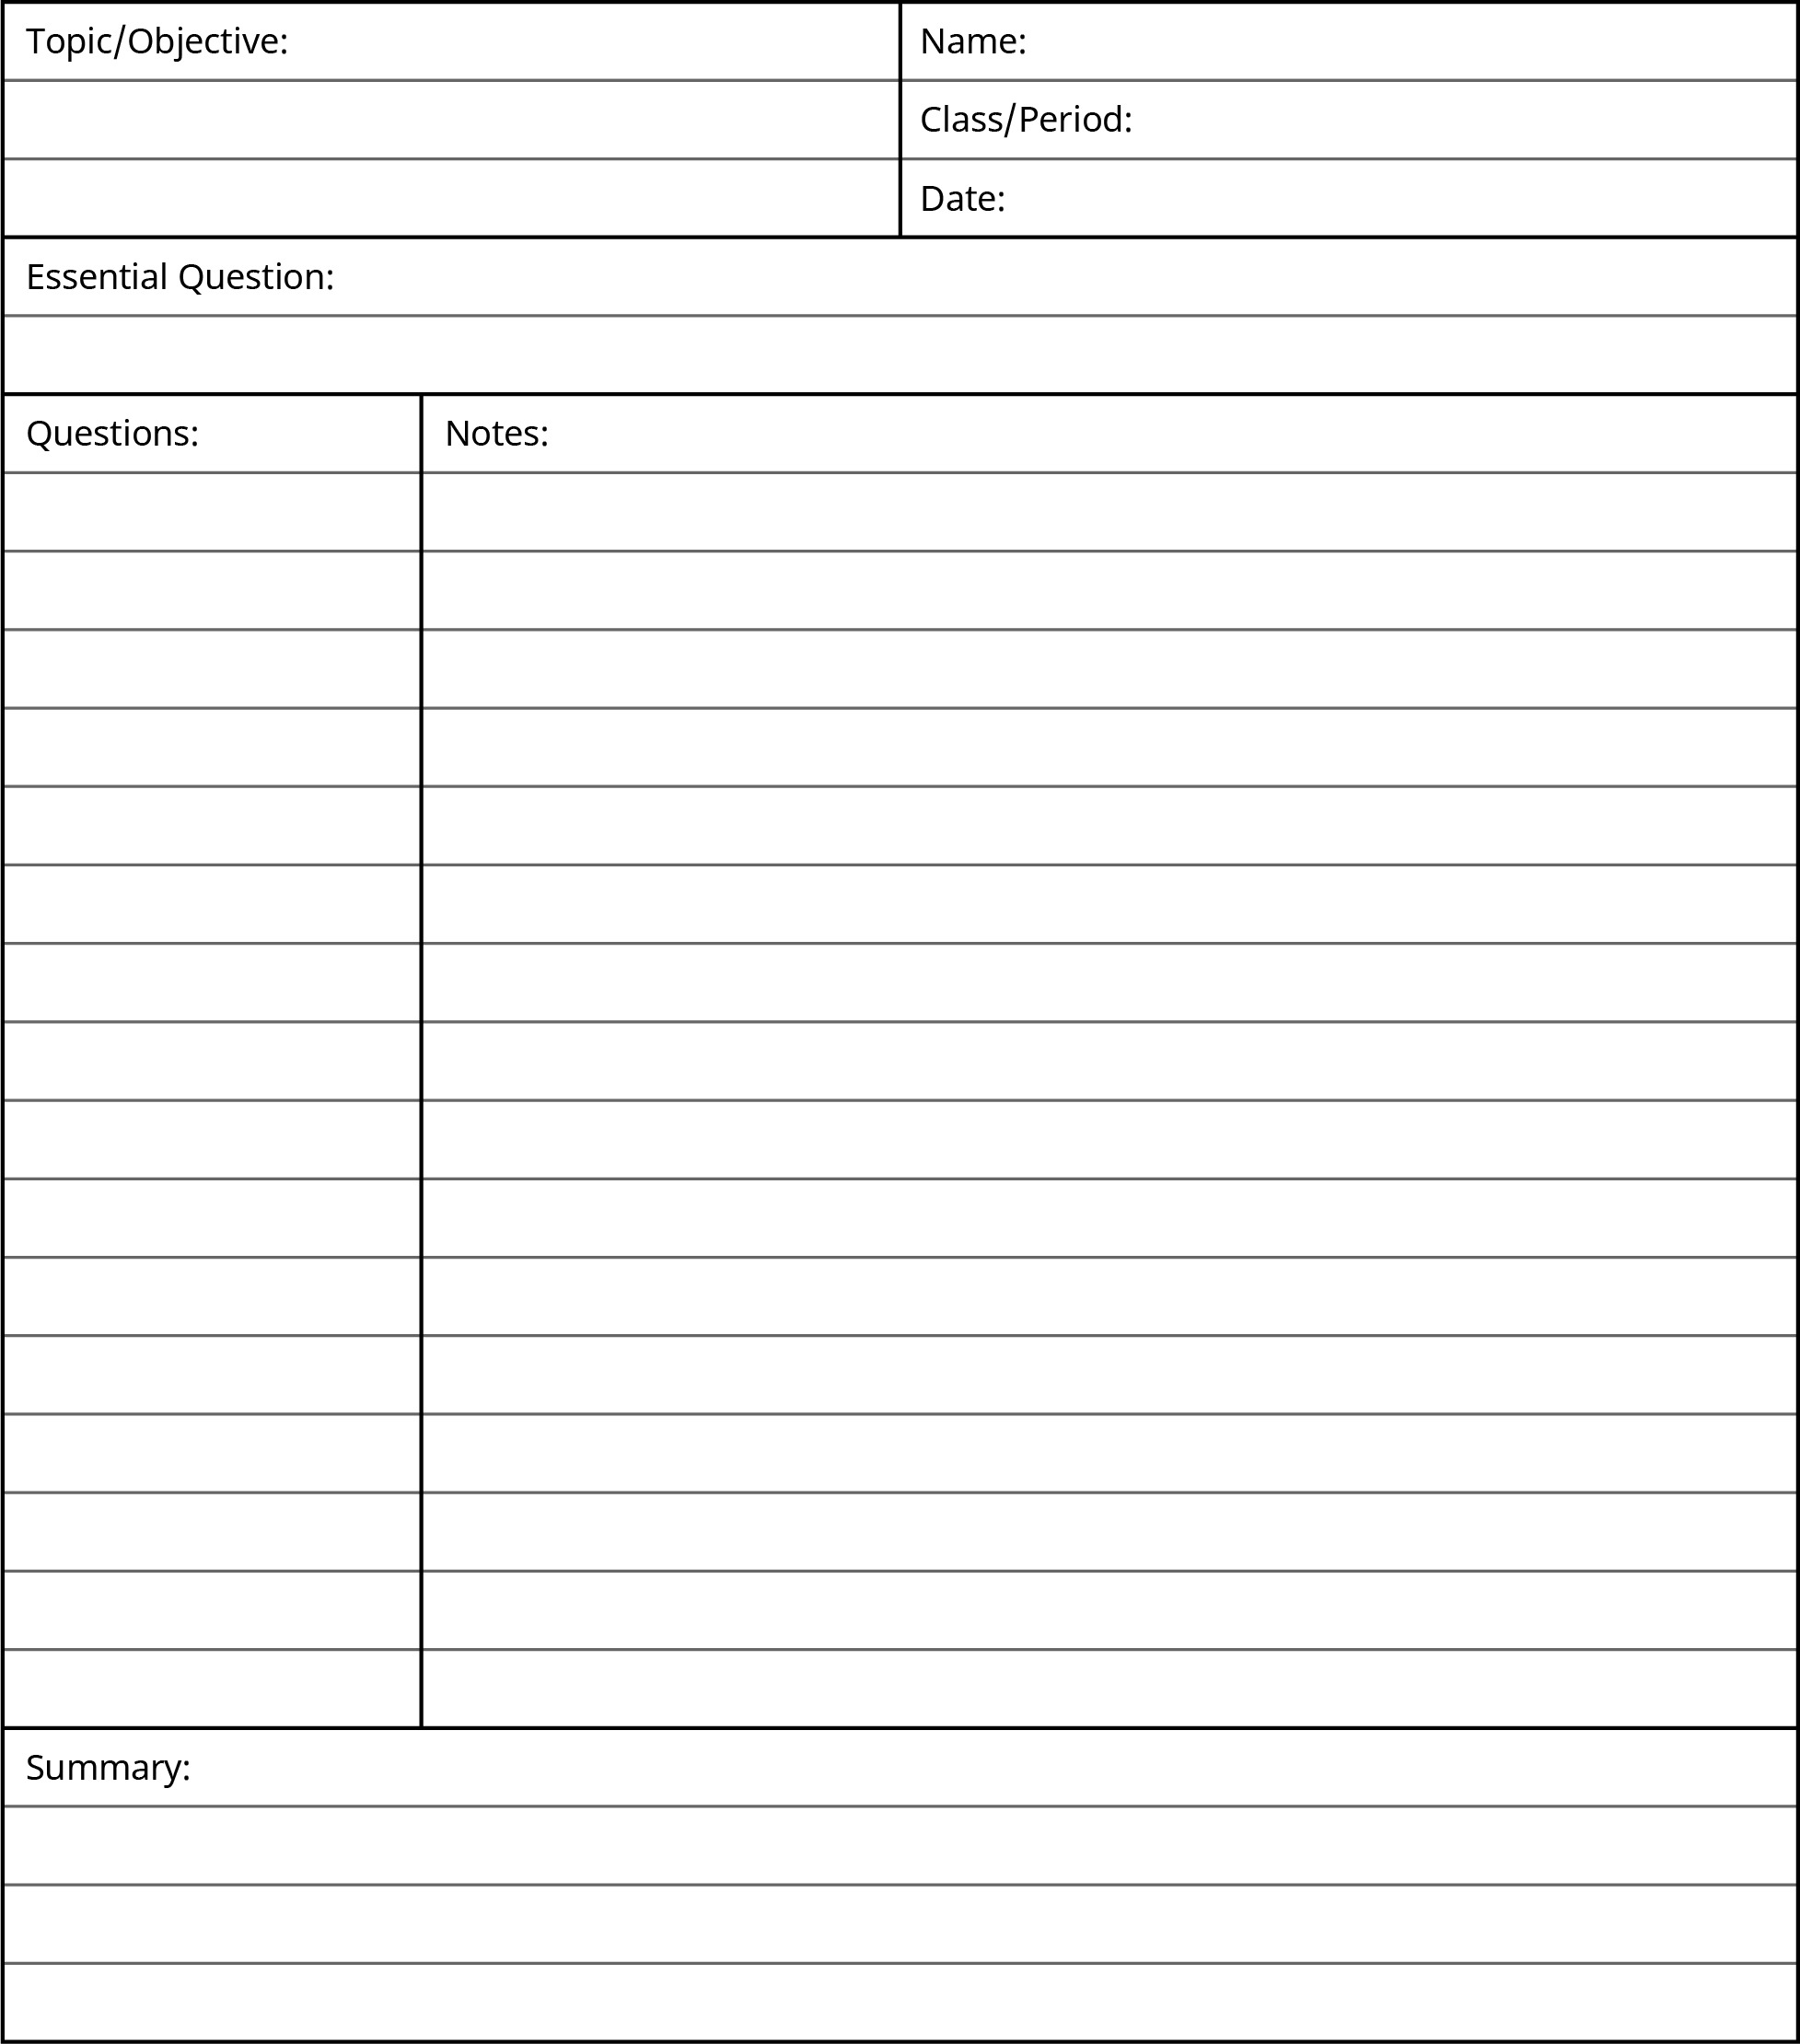 A page of a school notebook has rows and columns for “Topic/Objective,” “Name,” “Class/Period,” “Date,” “Essential Question,” “Questions,” “Notes,” and “Summary.”